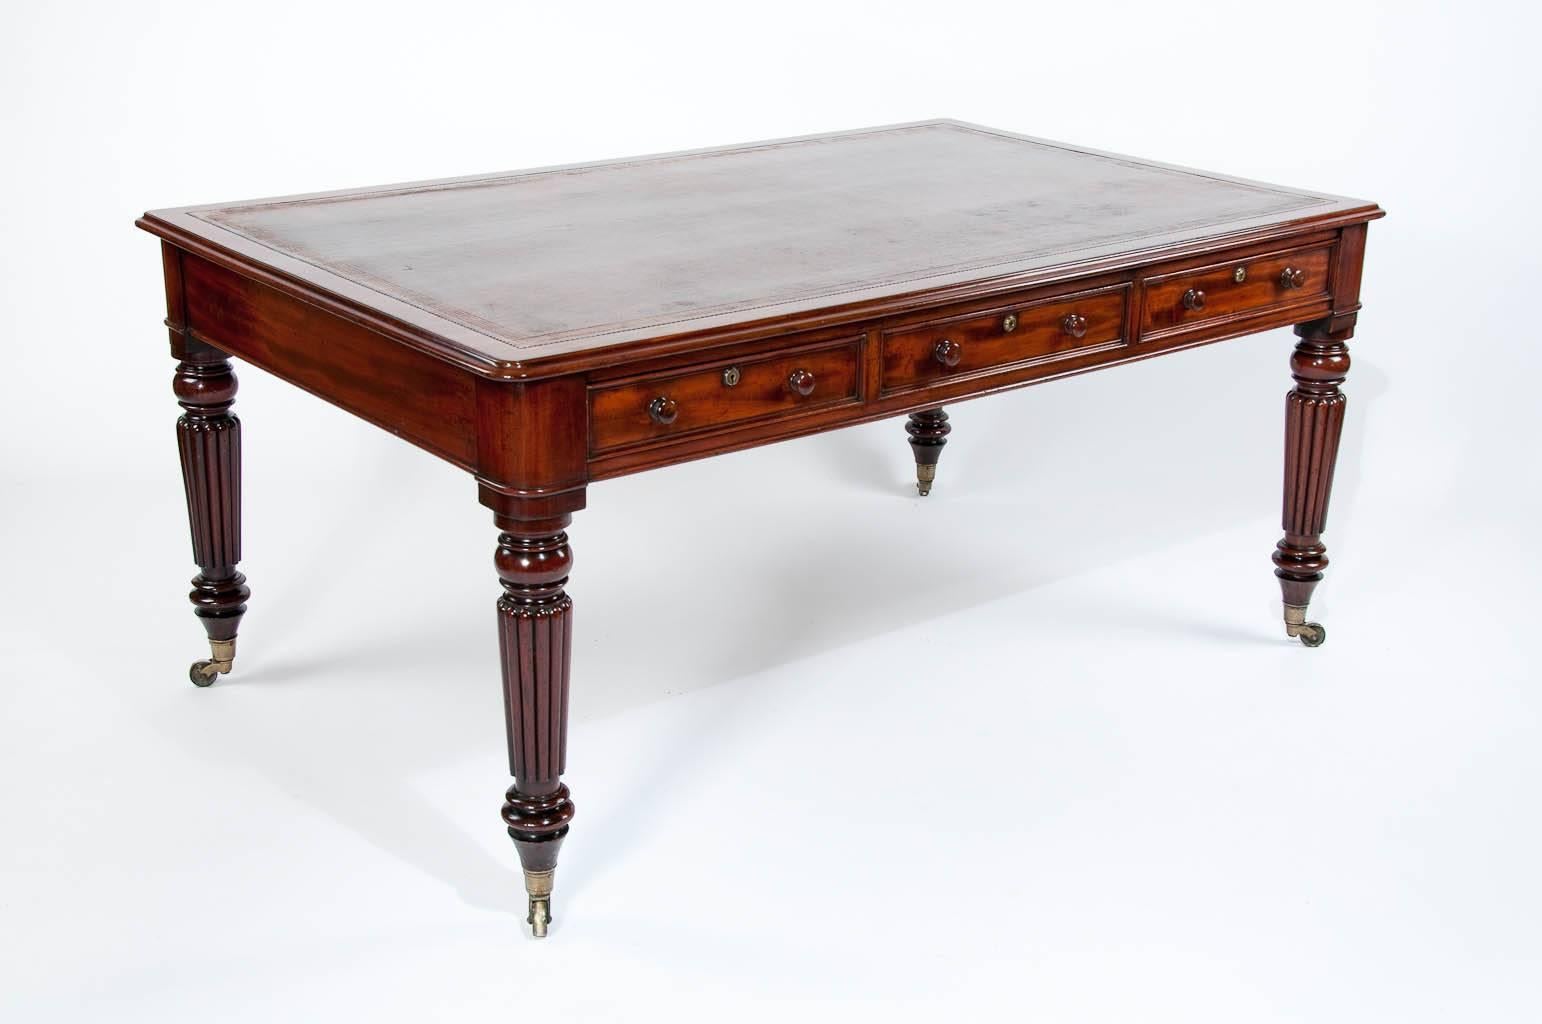 A stunning six-drawer mahogany partners writing table / desk stamped M Wilson of 68 Great Queens Street, London. Constructed of the finely quality with very select timbers used this early 19th century Partners writing table dates to the late Regency